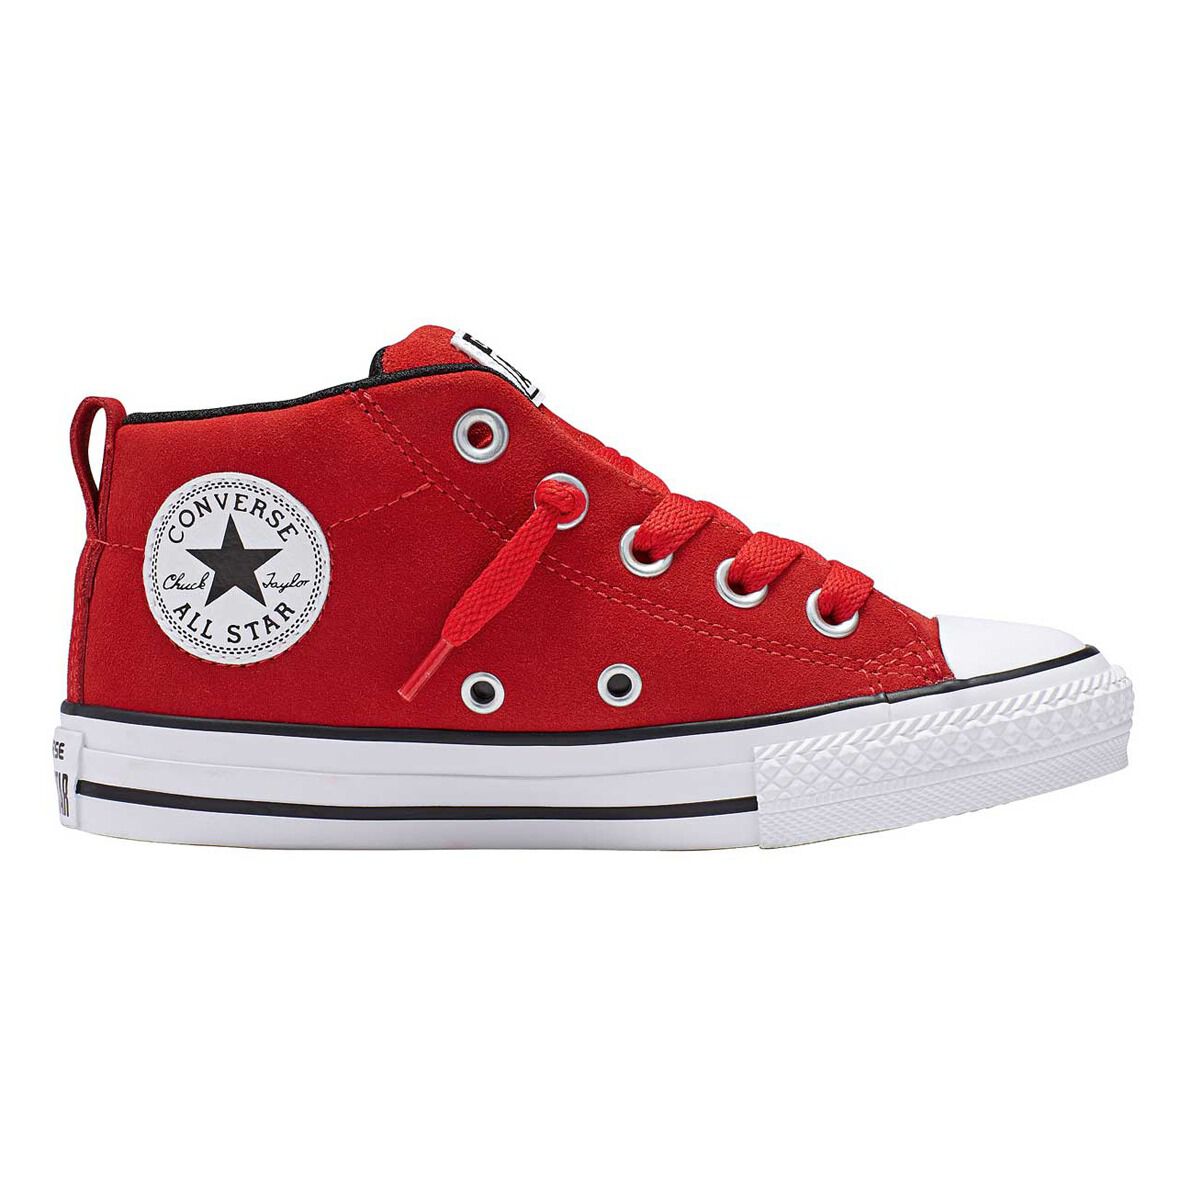 red white converse